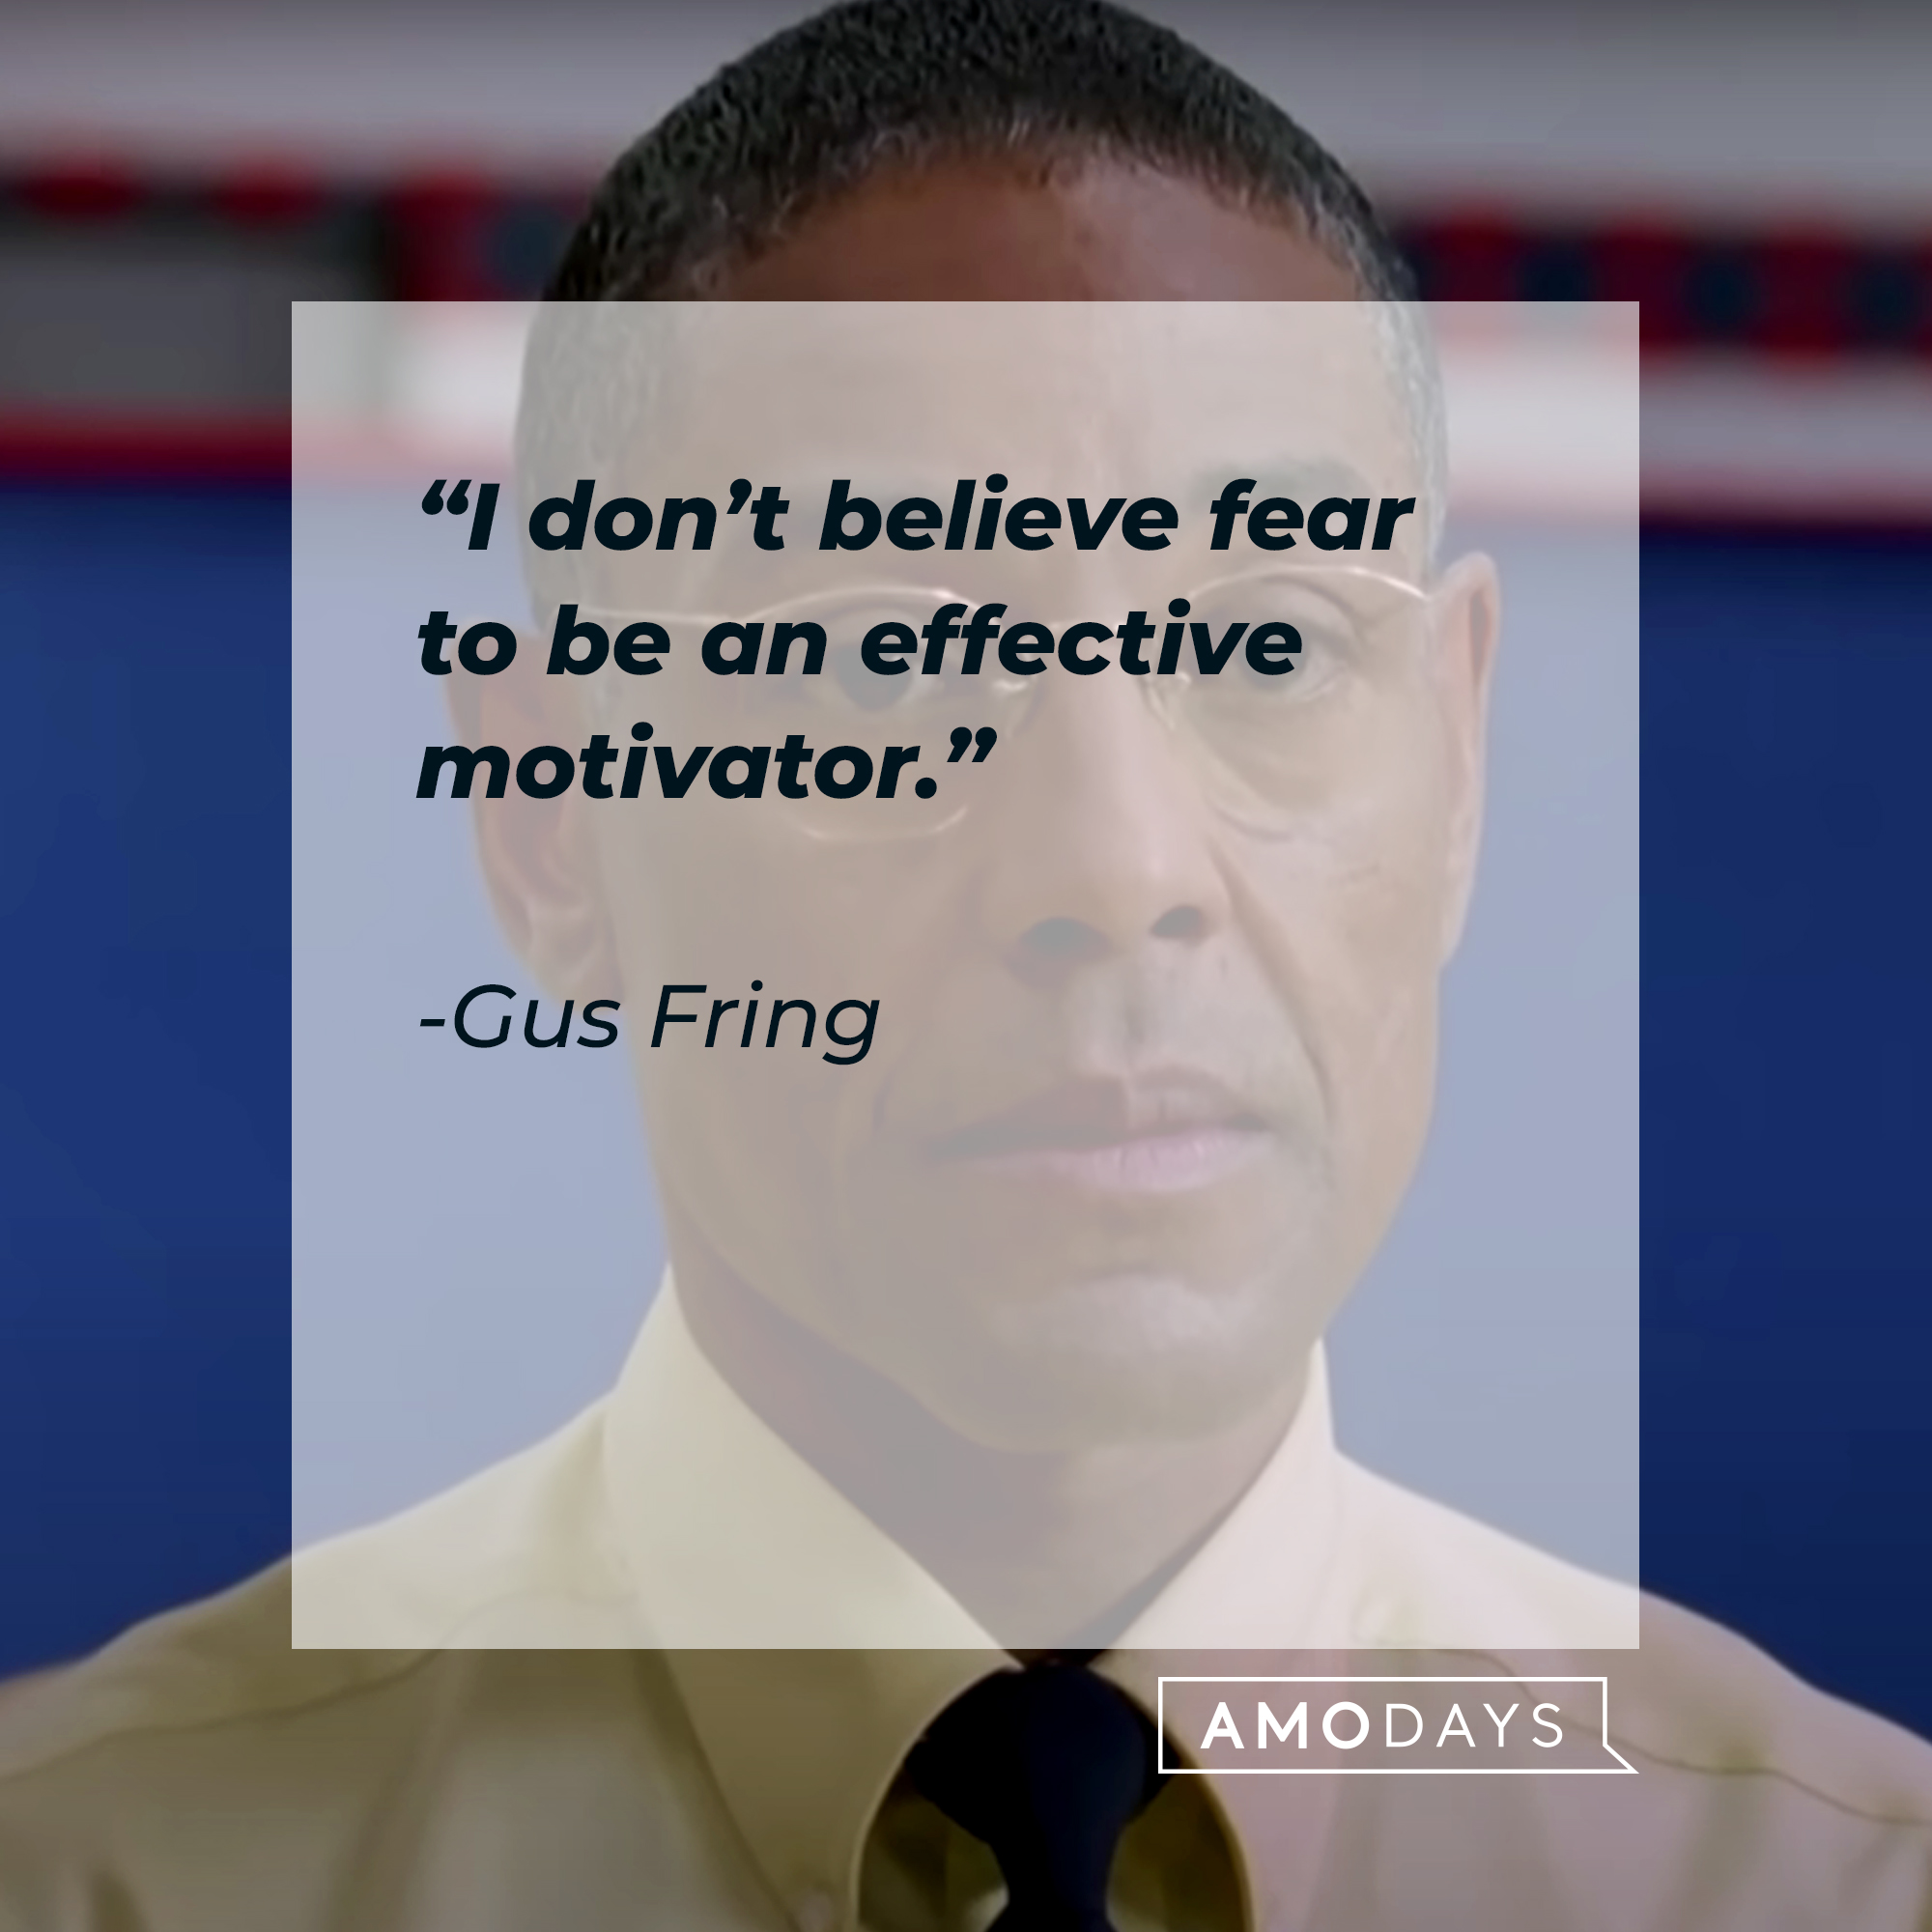 Gus Fring’s quote: “I don’t believe fear to be an effective motivator.” | Source: Youtube.com/breakingbad